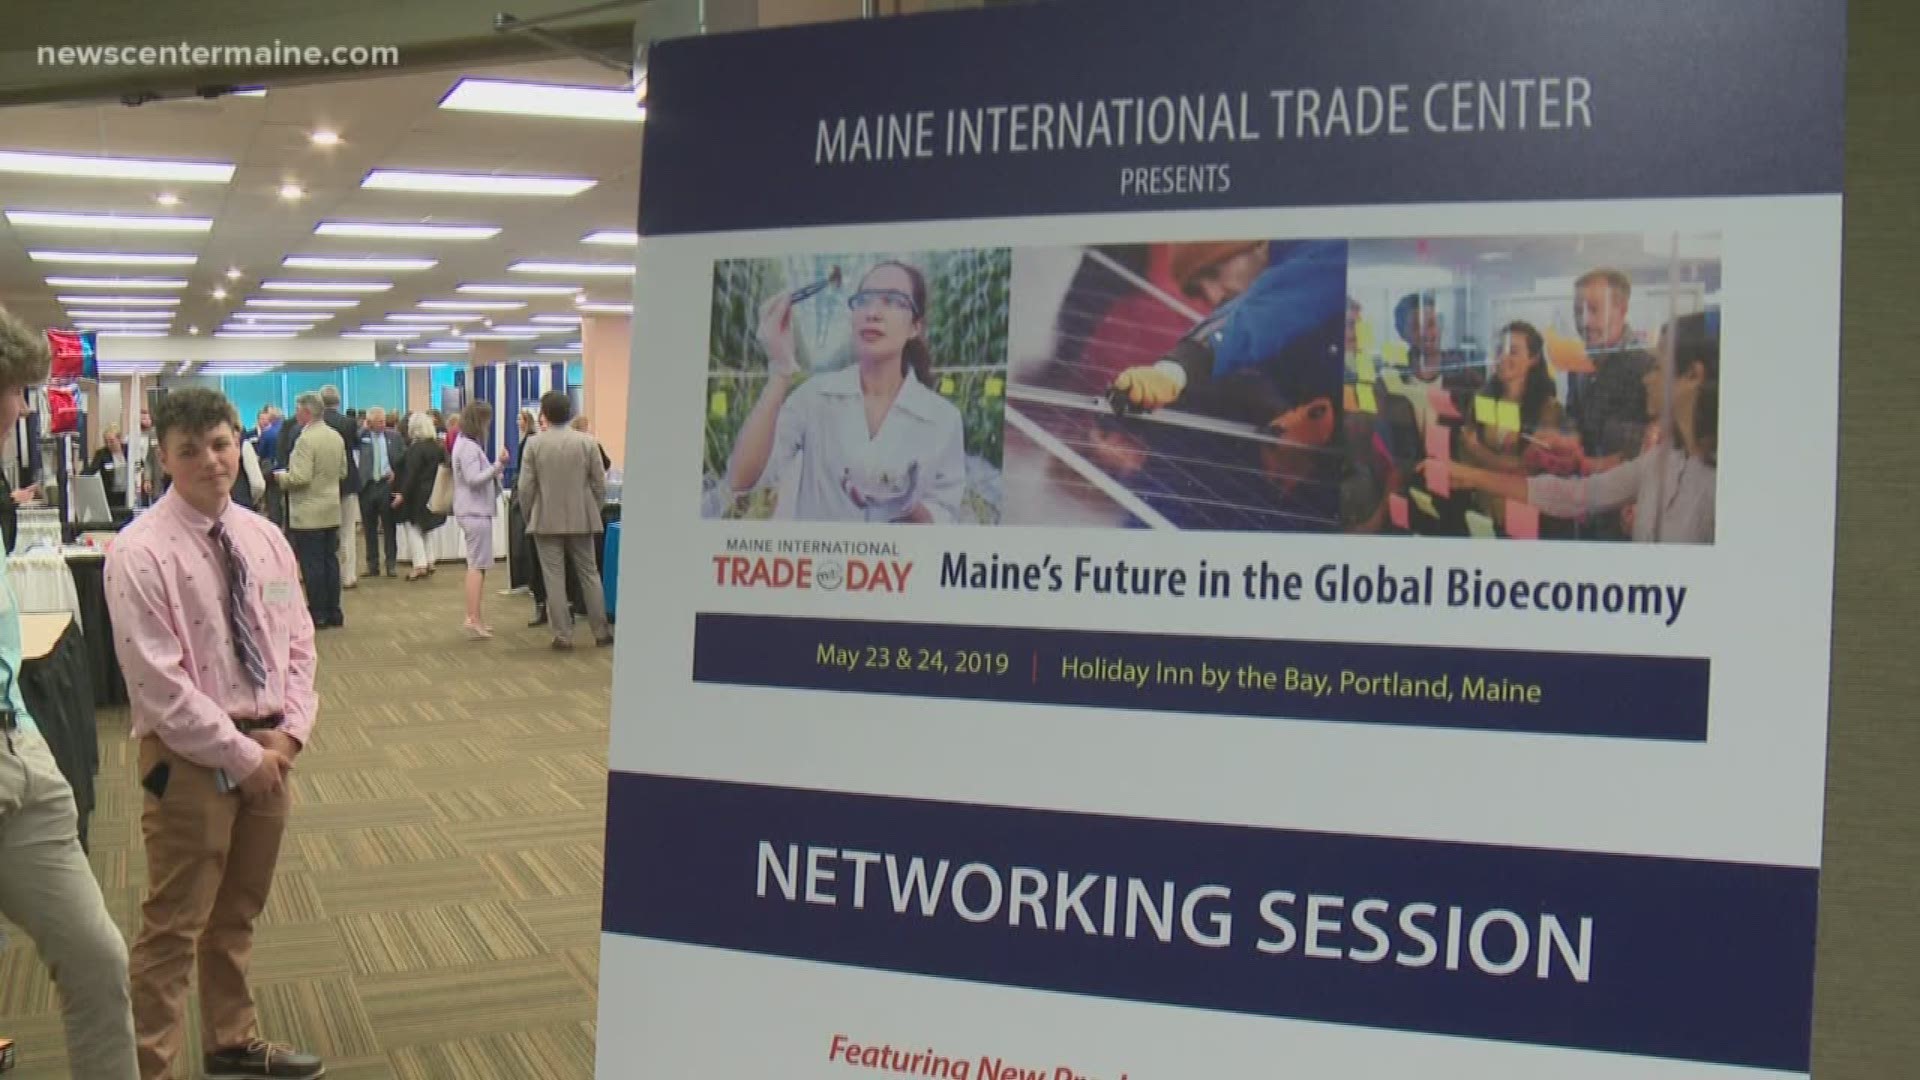 The future of Maine's bio-economy was front and center at Portland's International Trade Day.